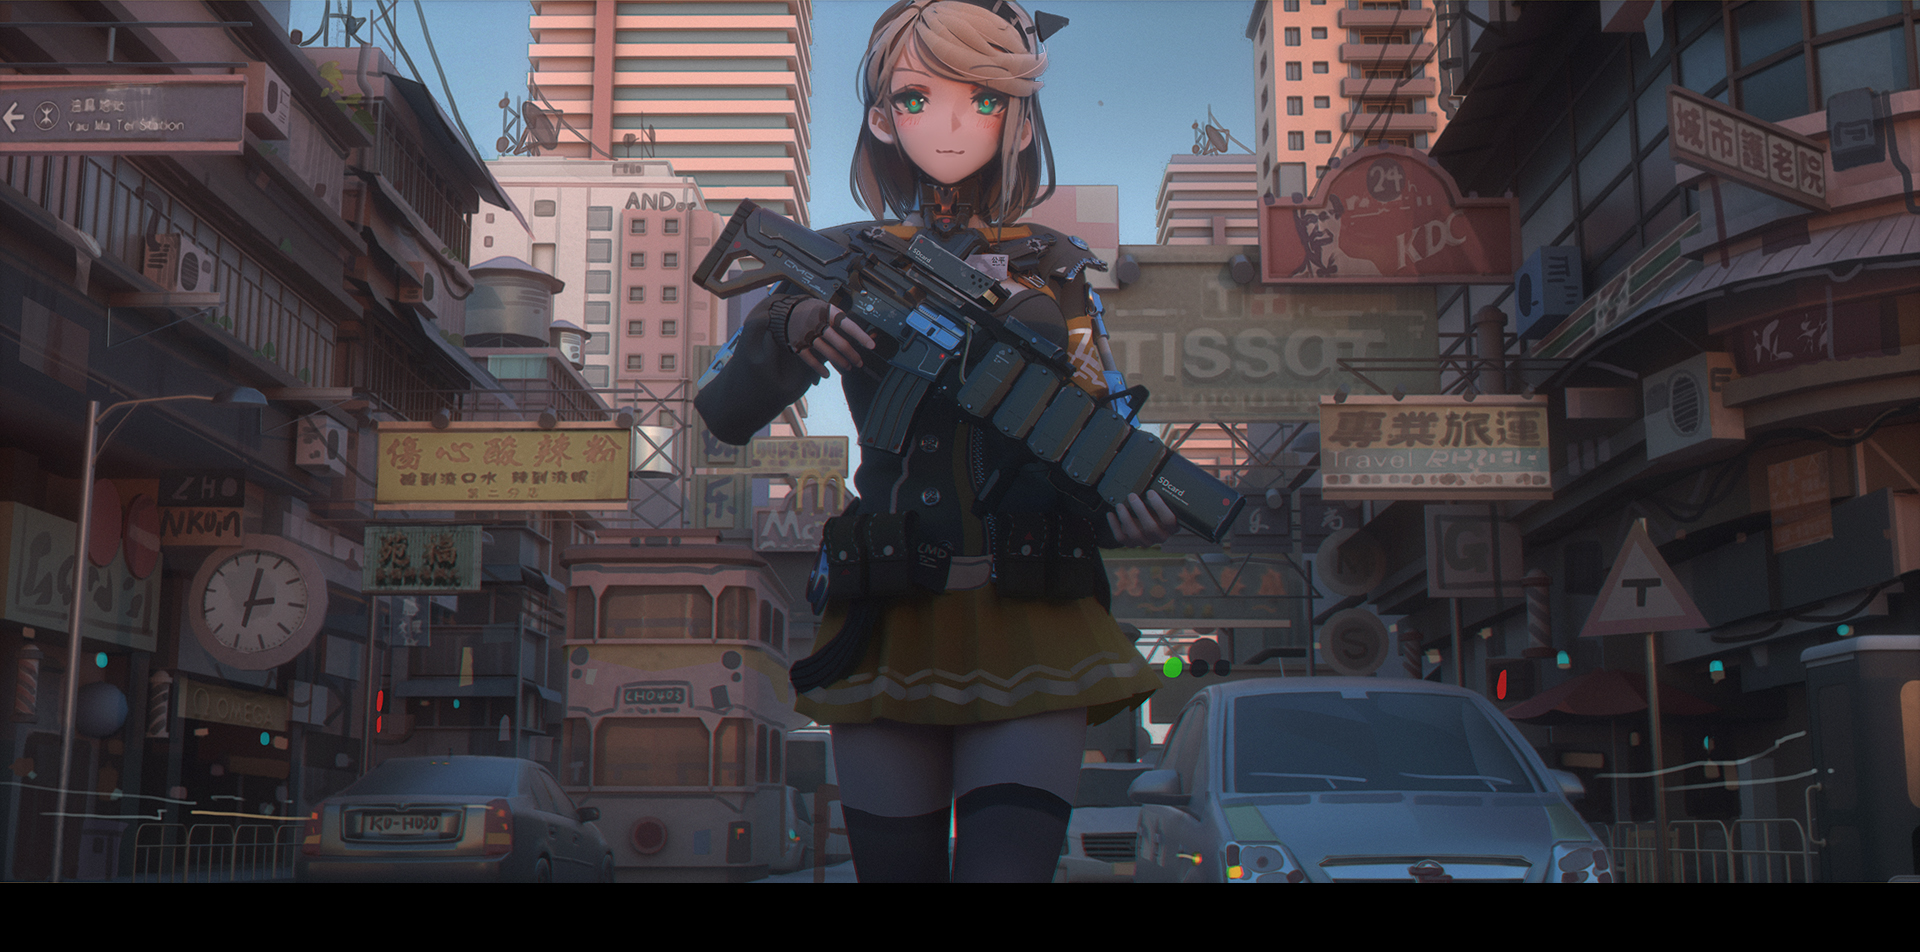 T5 Anime Girls Girl With Weapon Frontal View Urban Traffic Opel Cadillac Buses 1920x952